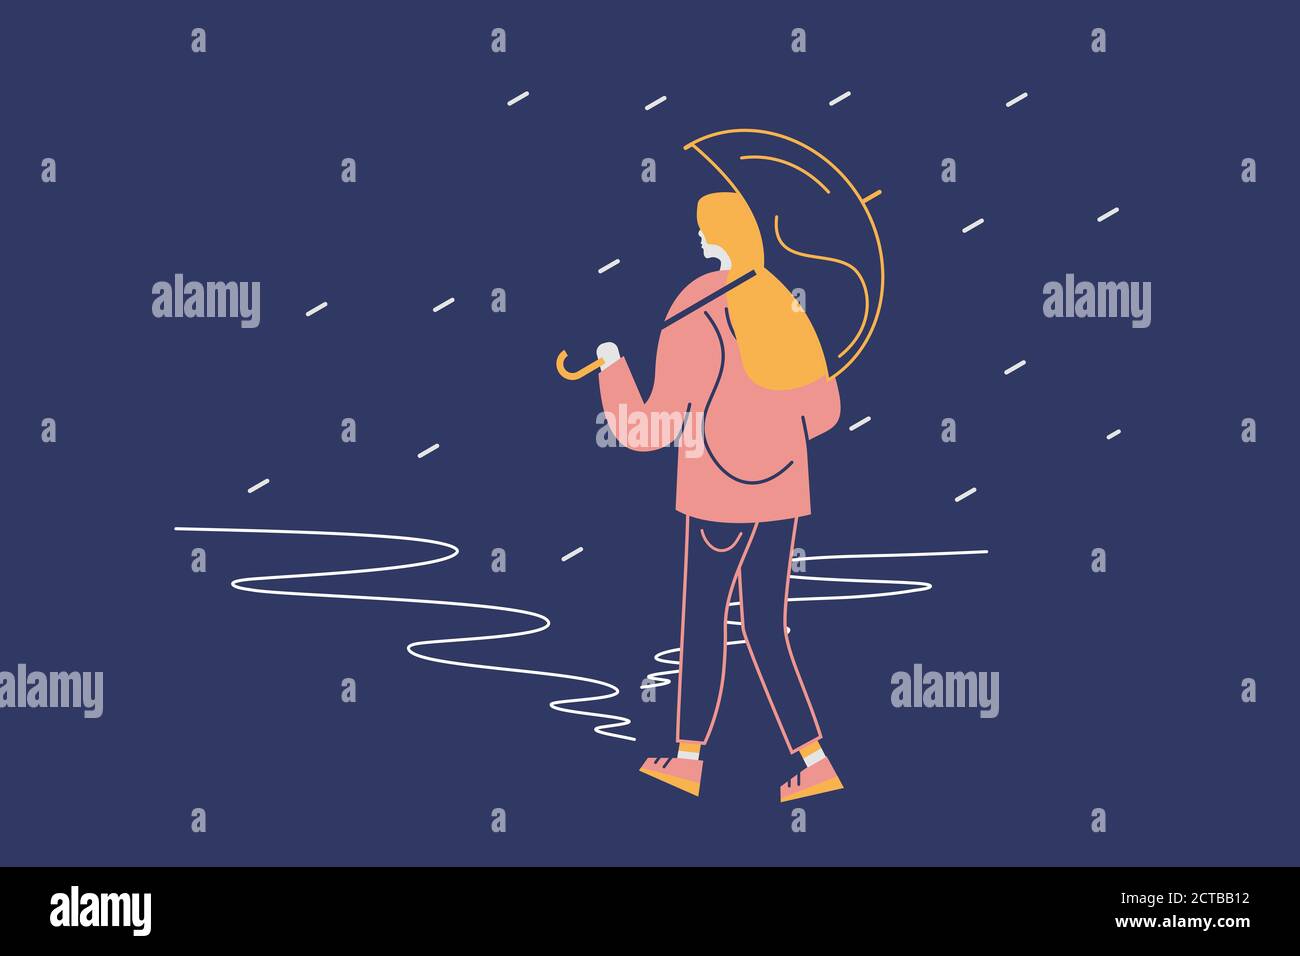 Young female character walking in the rain with umbrella in front of two paths. Decision making concept. Flat design modern illustration. Stock Photo